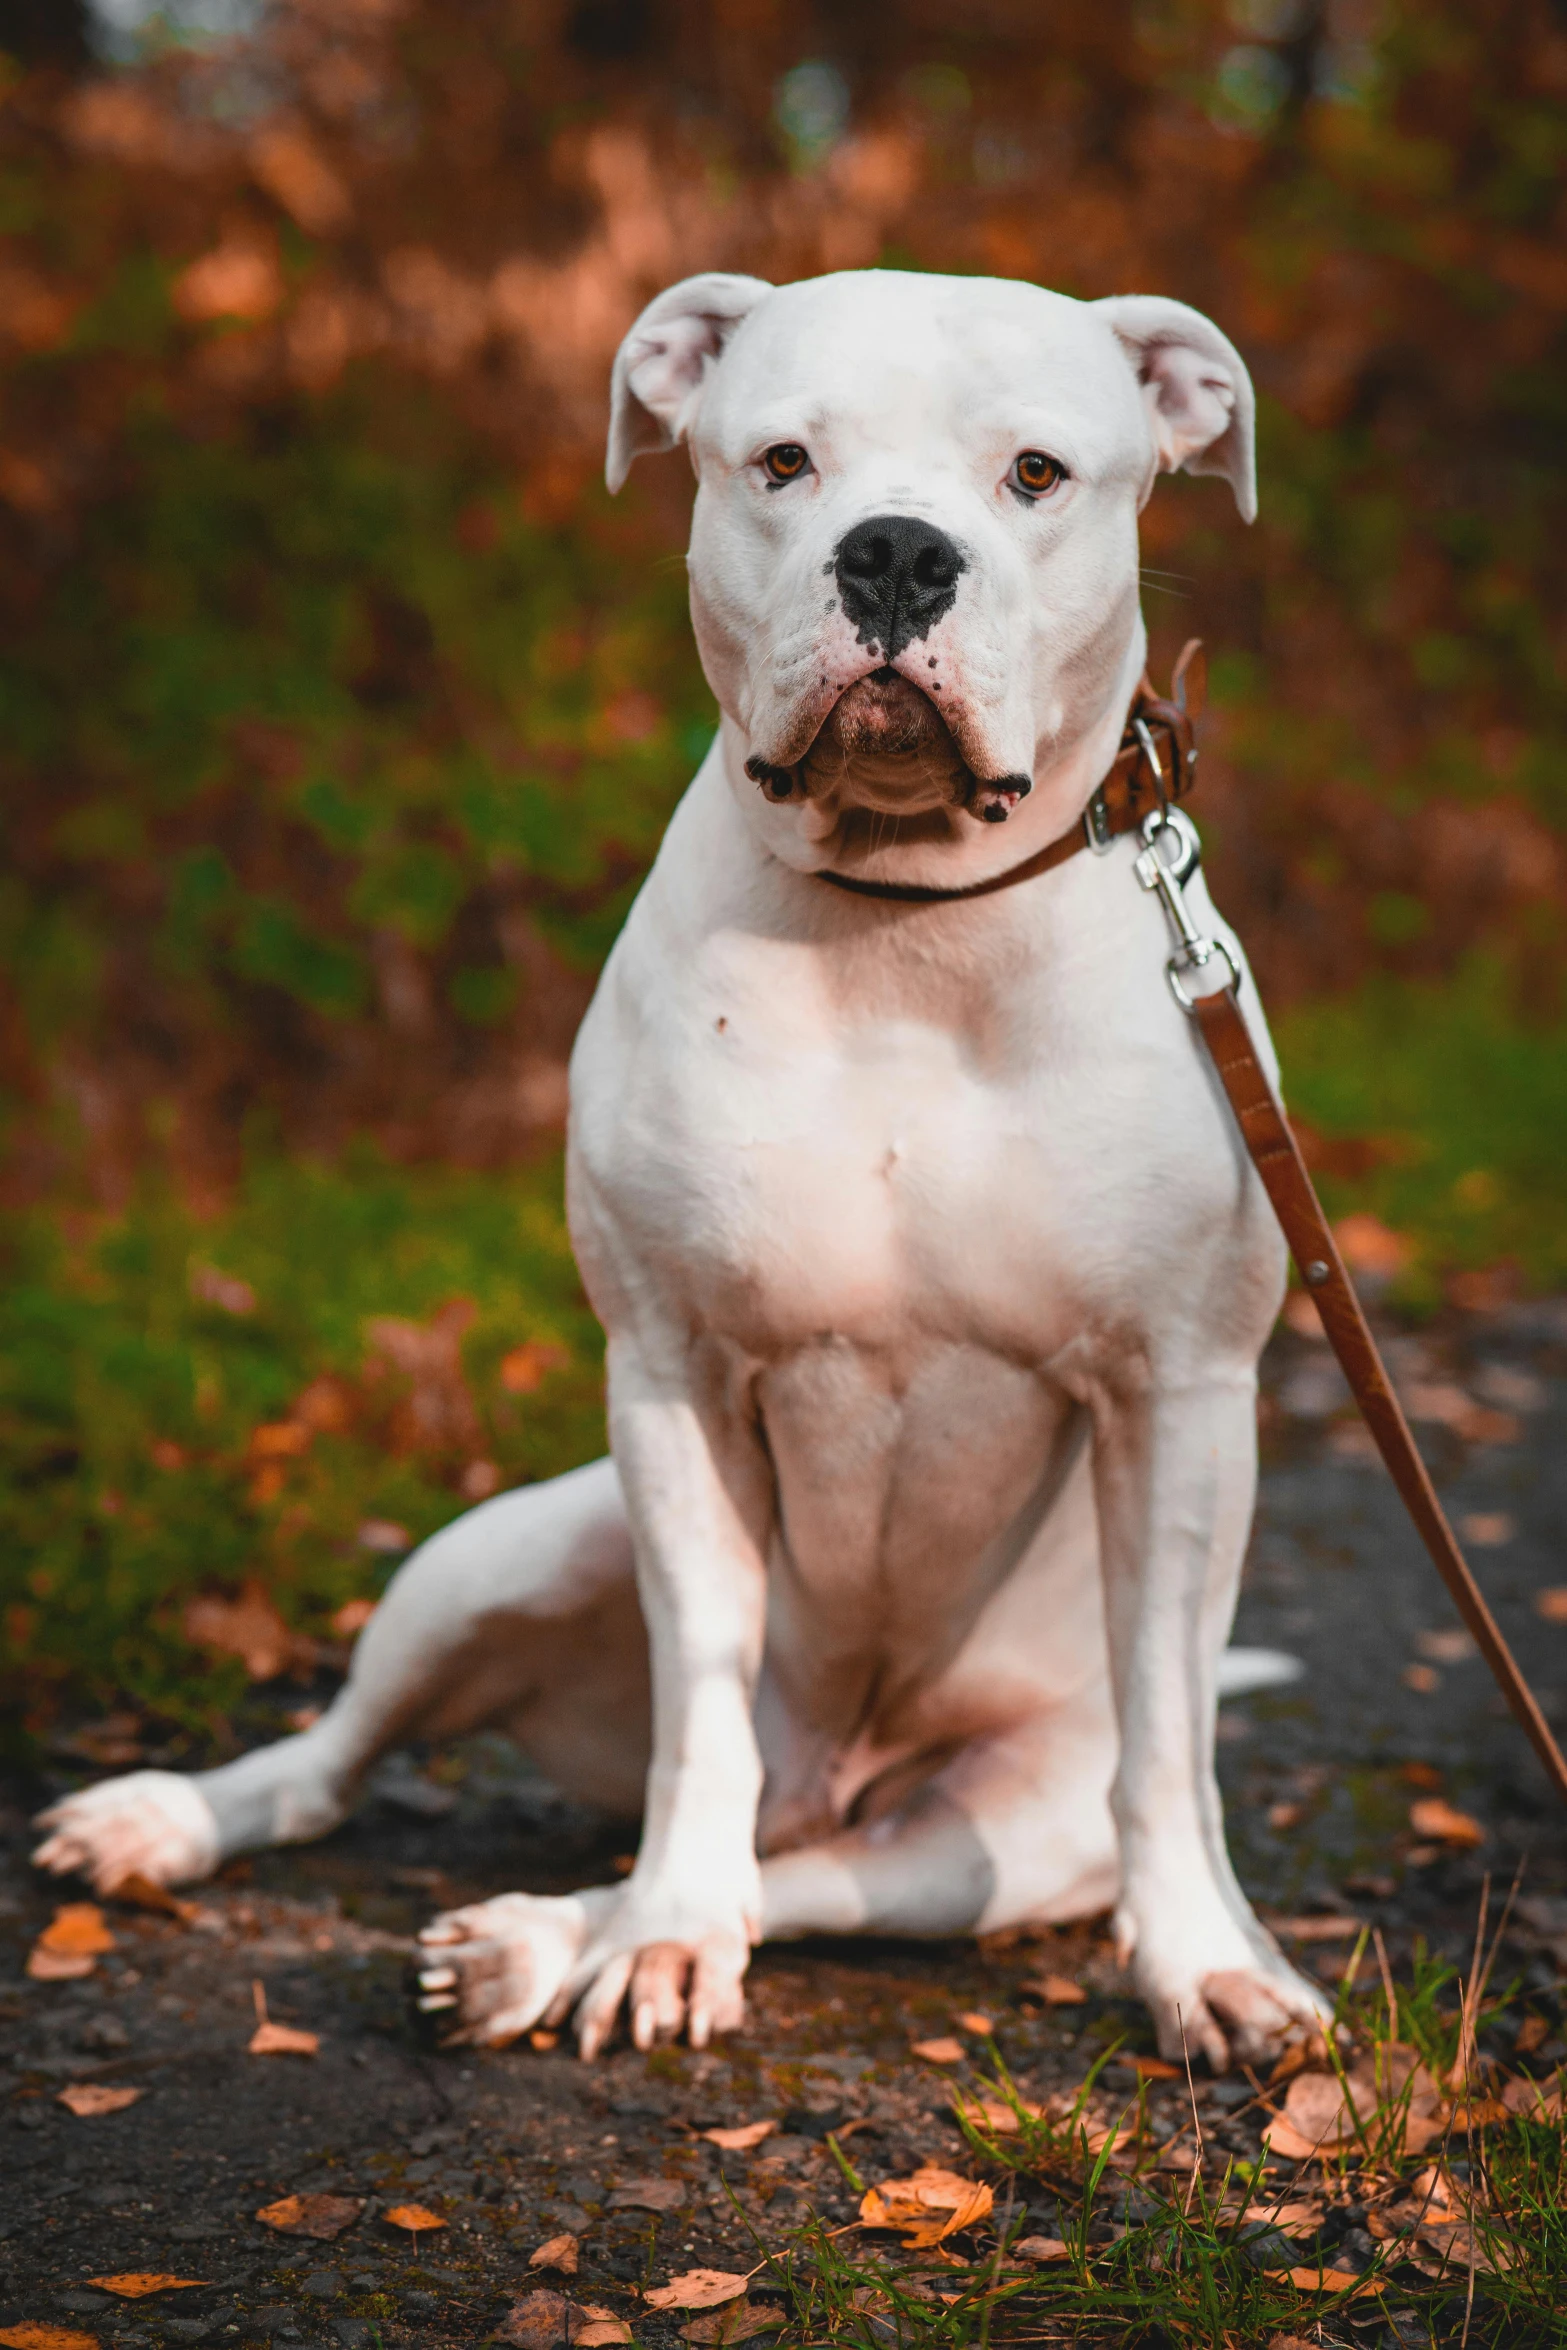 white dog with large eyes and brown collar sitting on concrete